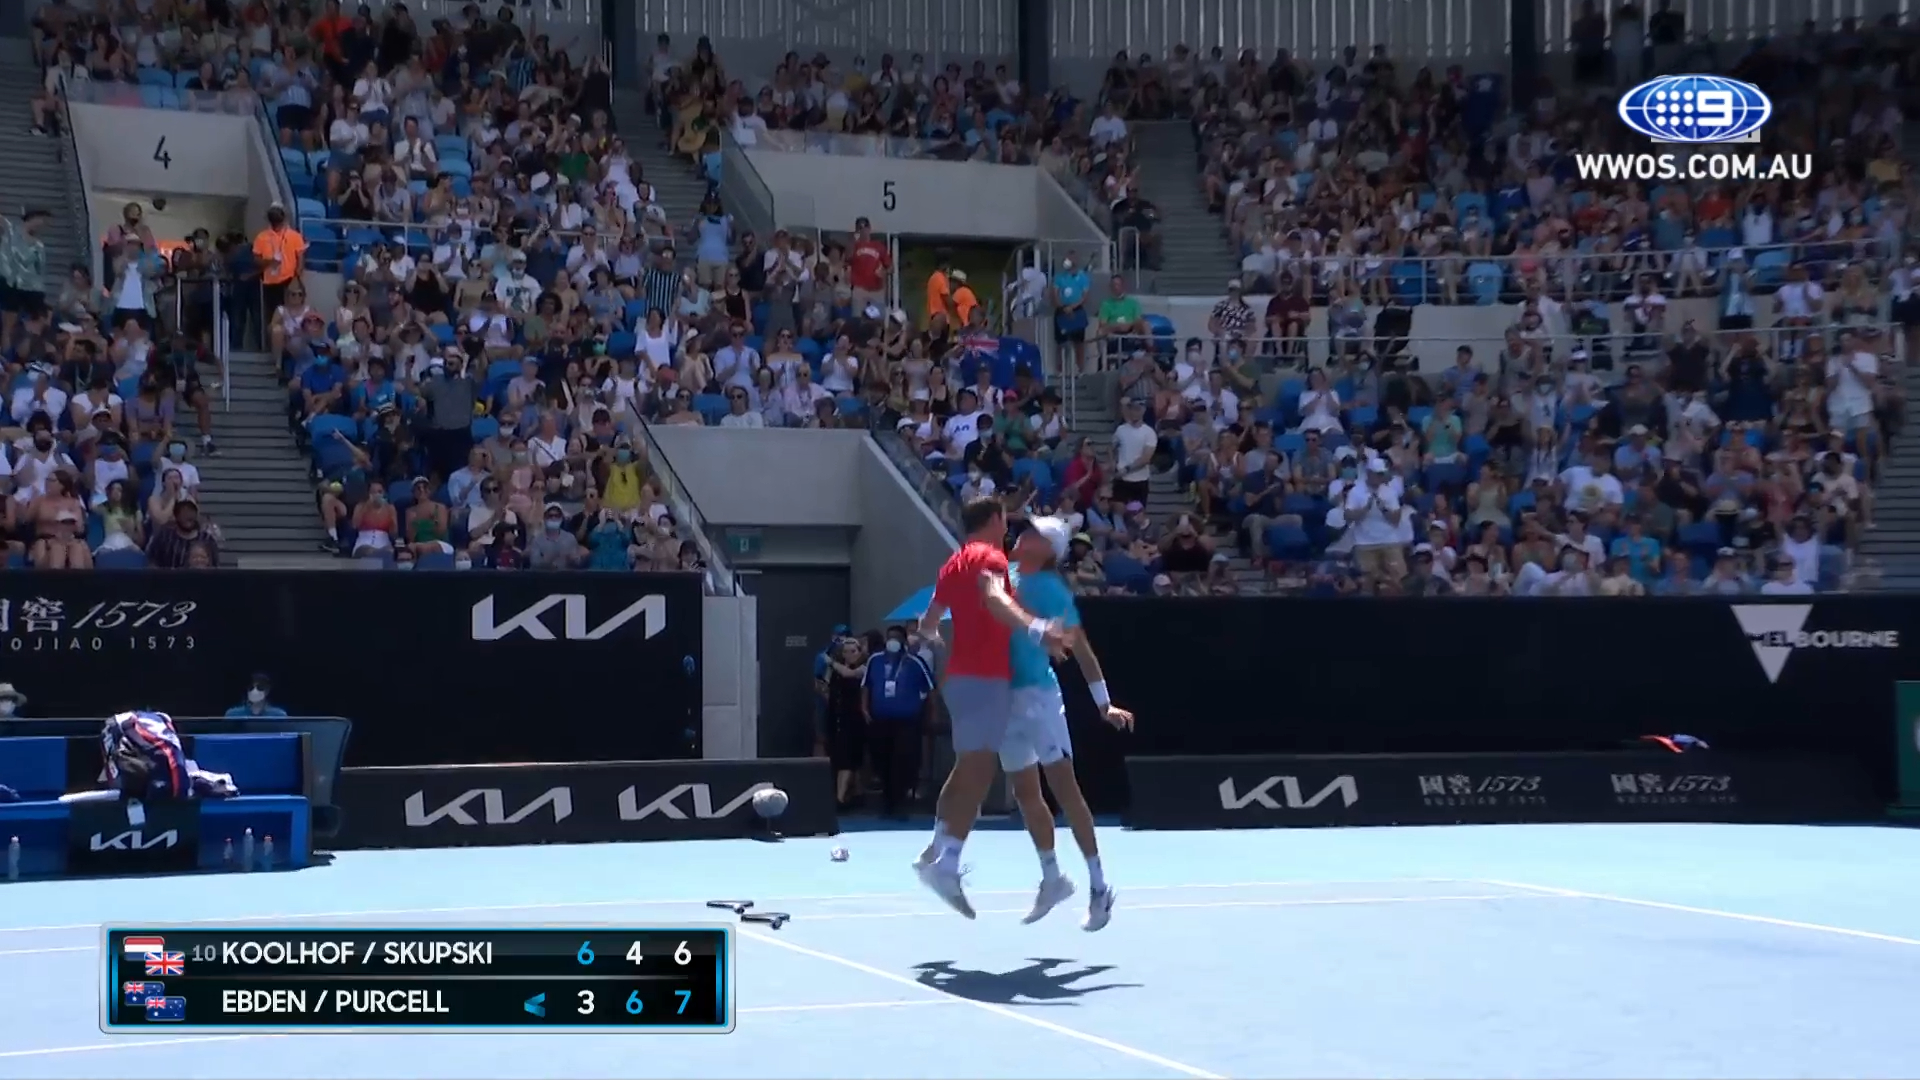 Ebden & Purcell make semis in hard fought win - Doubles Quarter-Final highlights